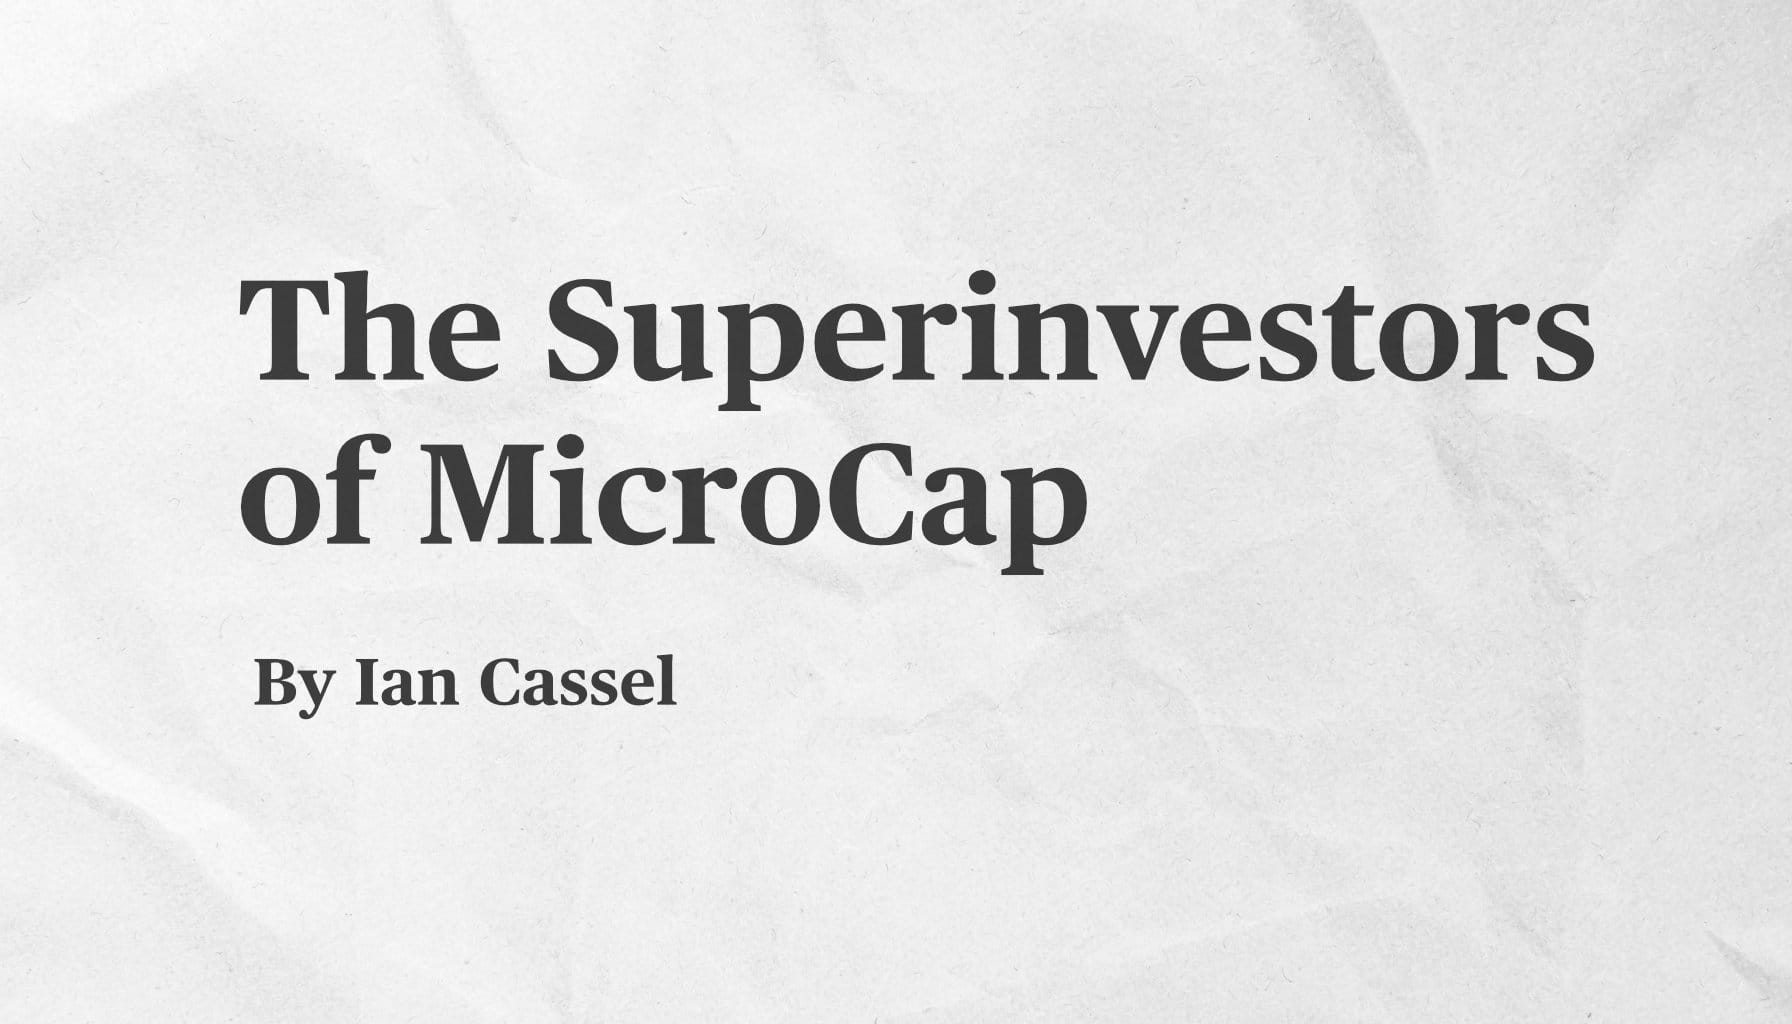 The Superinvestors of MicroCap